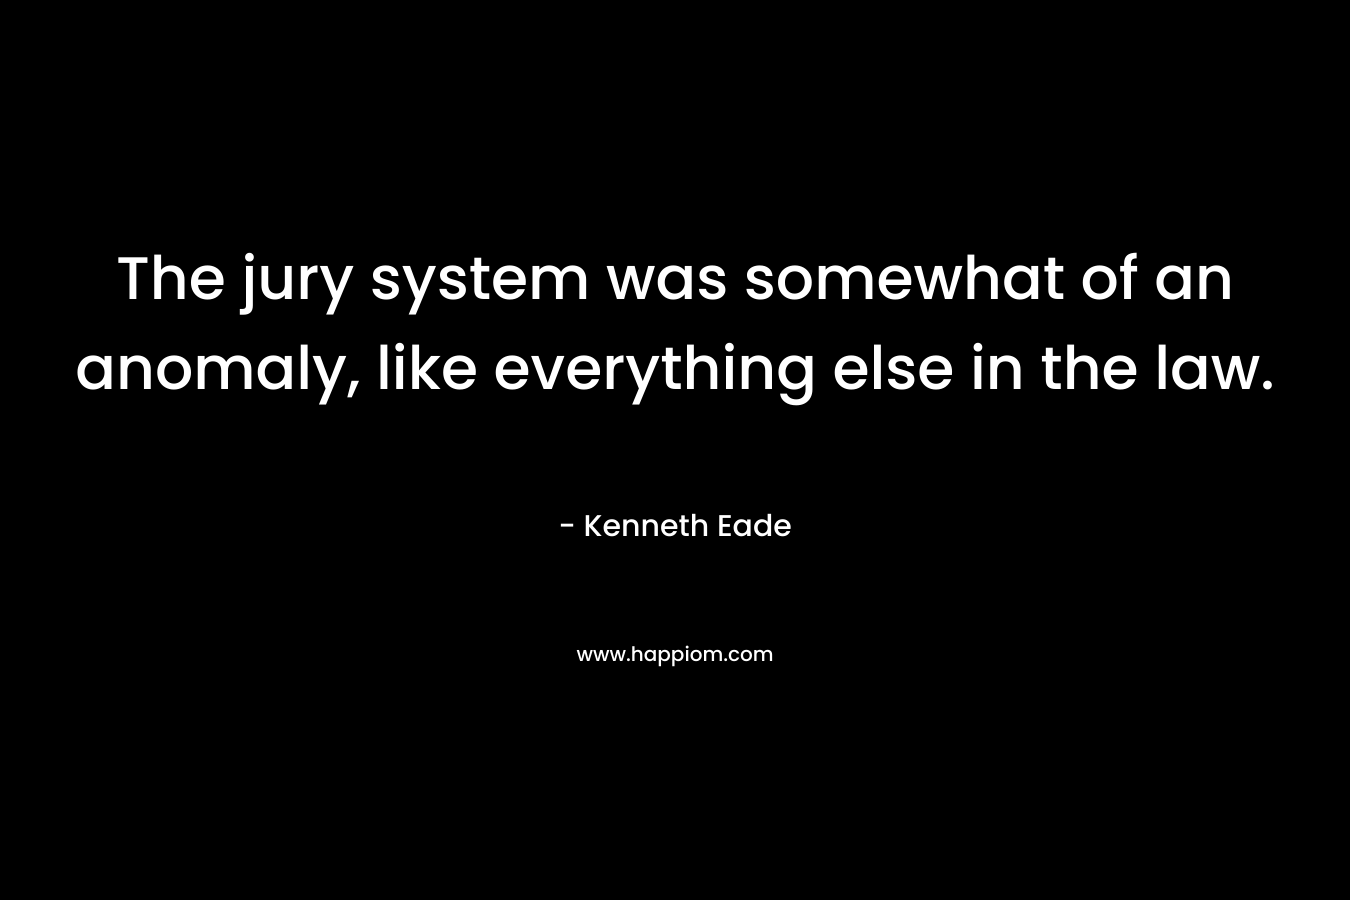 The jury system was somewhat of an anomaly, like everything else in the law.